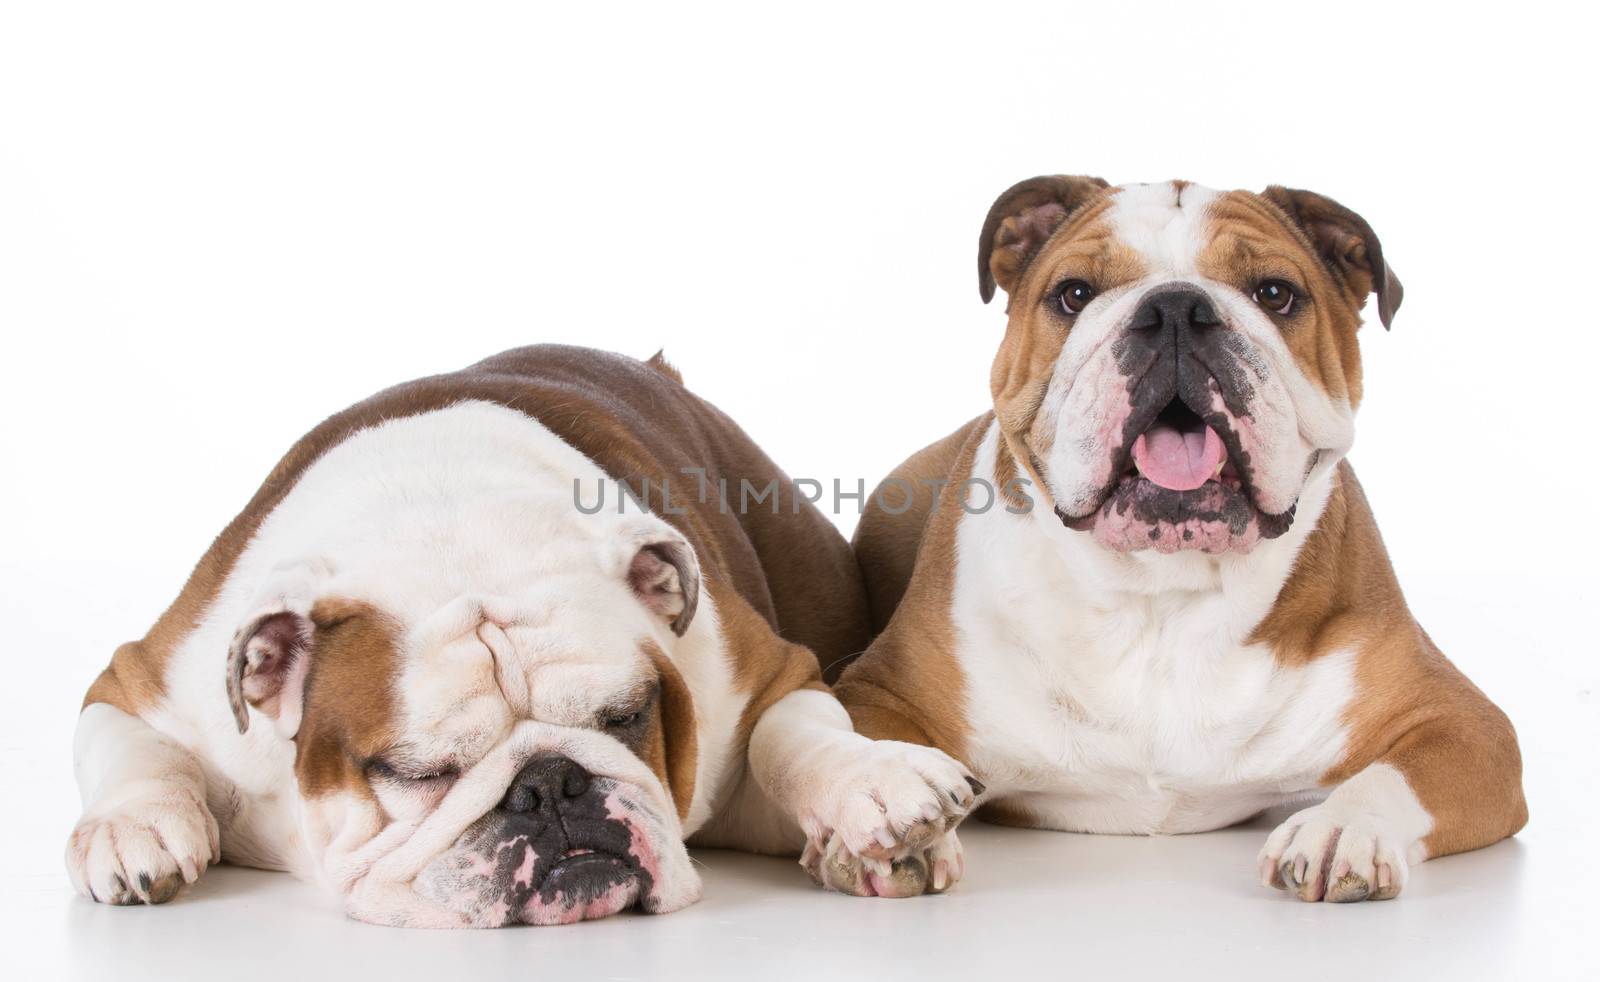 one dog comforting another on white background